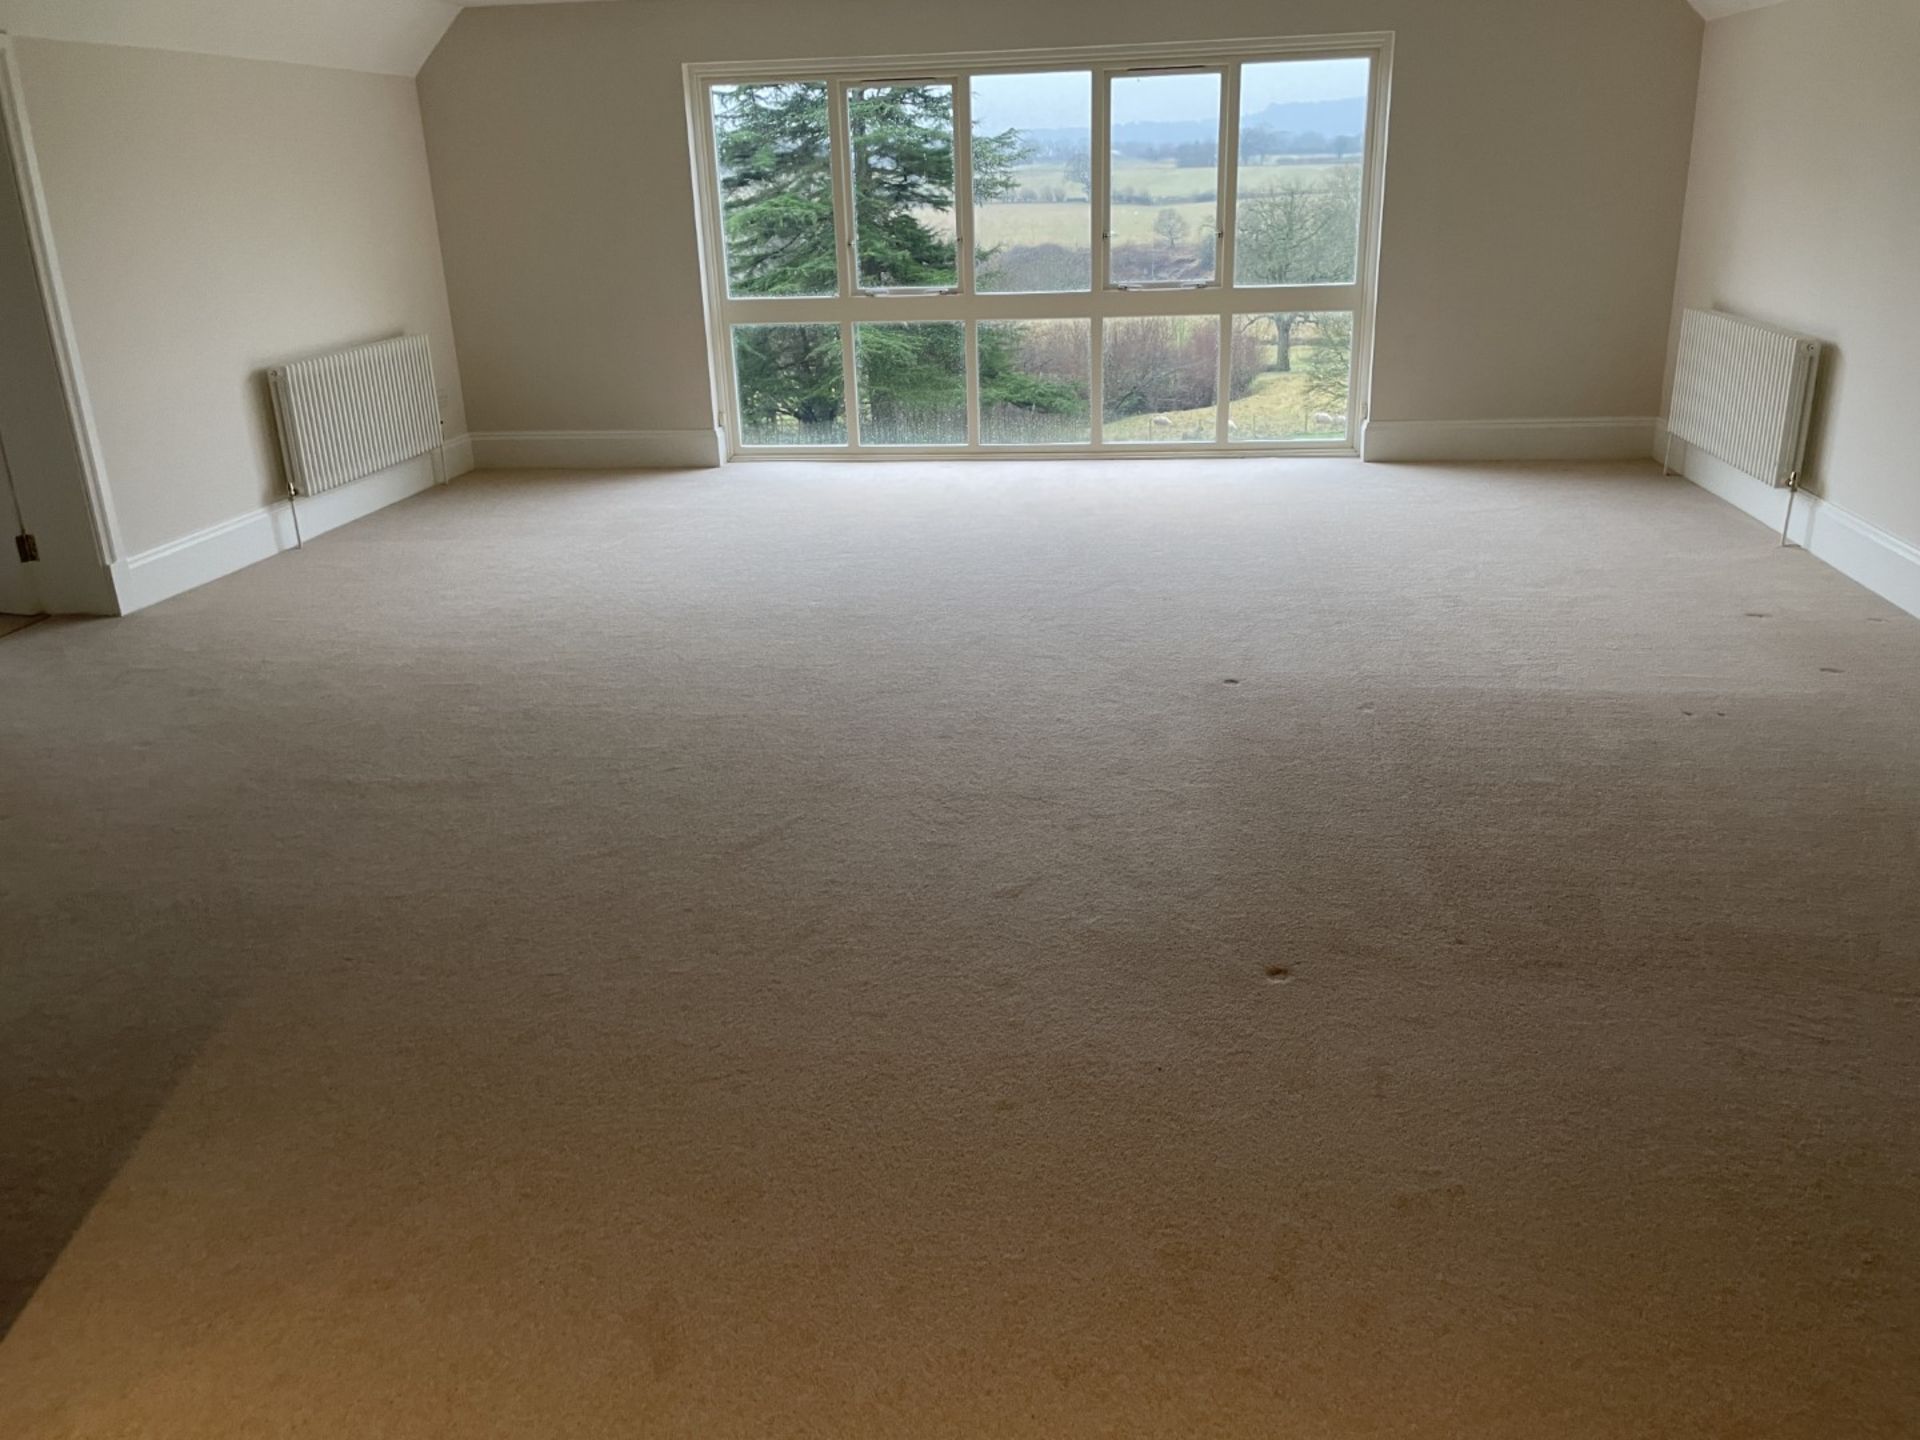 1 x Luxury Wool Master Bedroom Carpet in a Neutral Tone with Premium Underlay - Ref: UPSTRS/1 - - Image 8 of 9